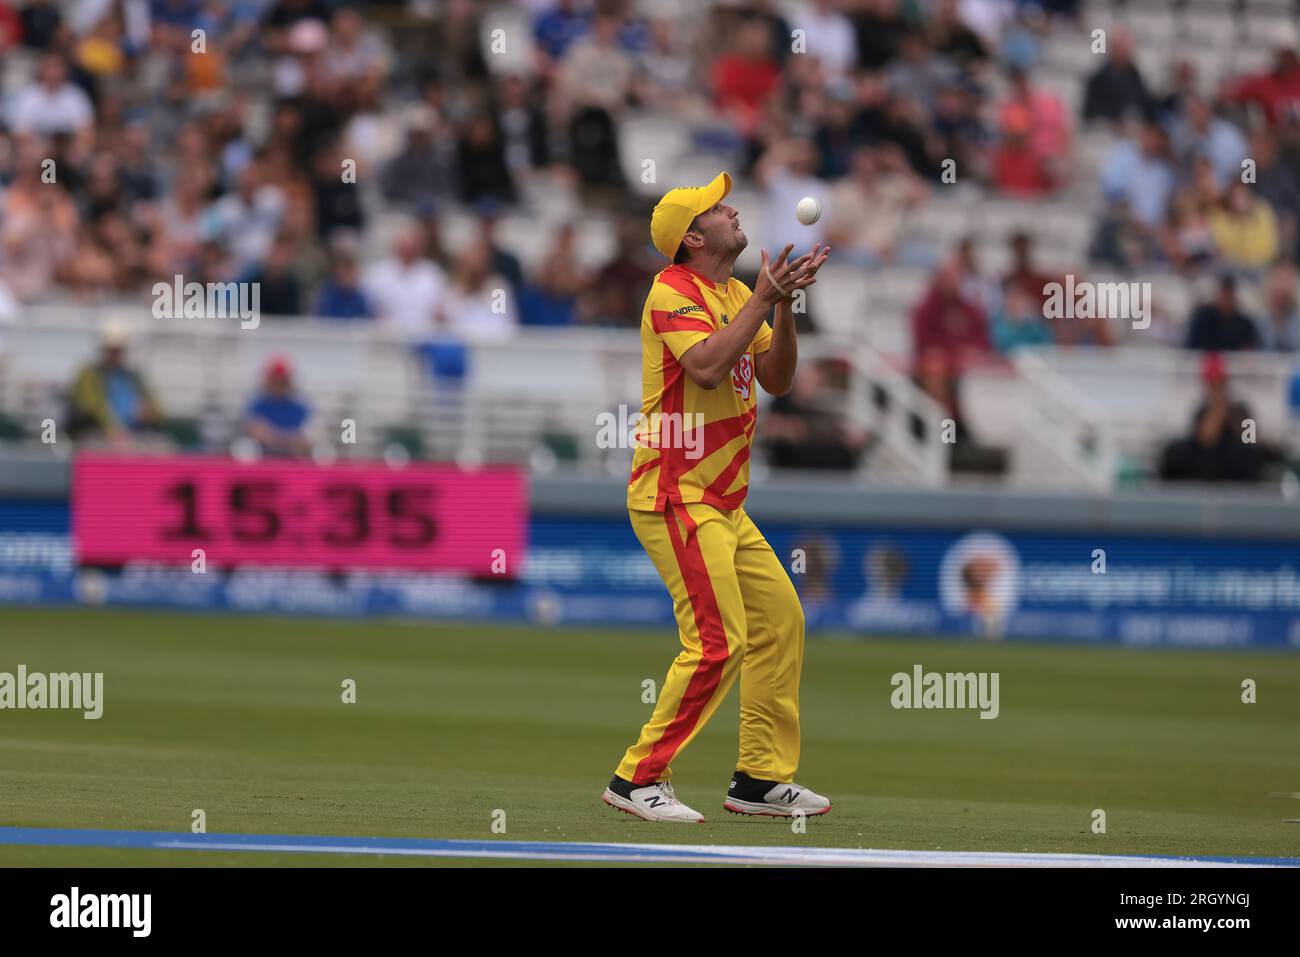 London, UK. 12th Aug, 2023. Lewis Gregory of the Trent Rockets takes the catch and Adam Rossington is out as the London Spirit take on the Trent Rockets in The Hundred men's competition at Lords. Credit: David Rowe/Alamy Live News Stock Photo